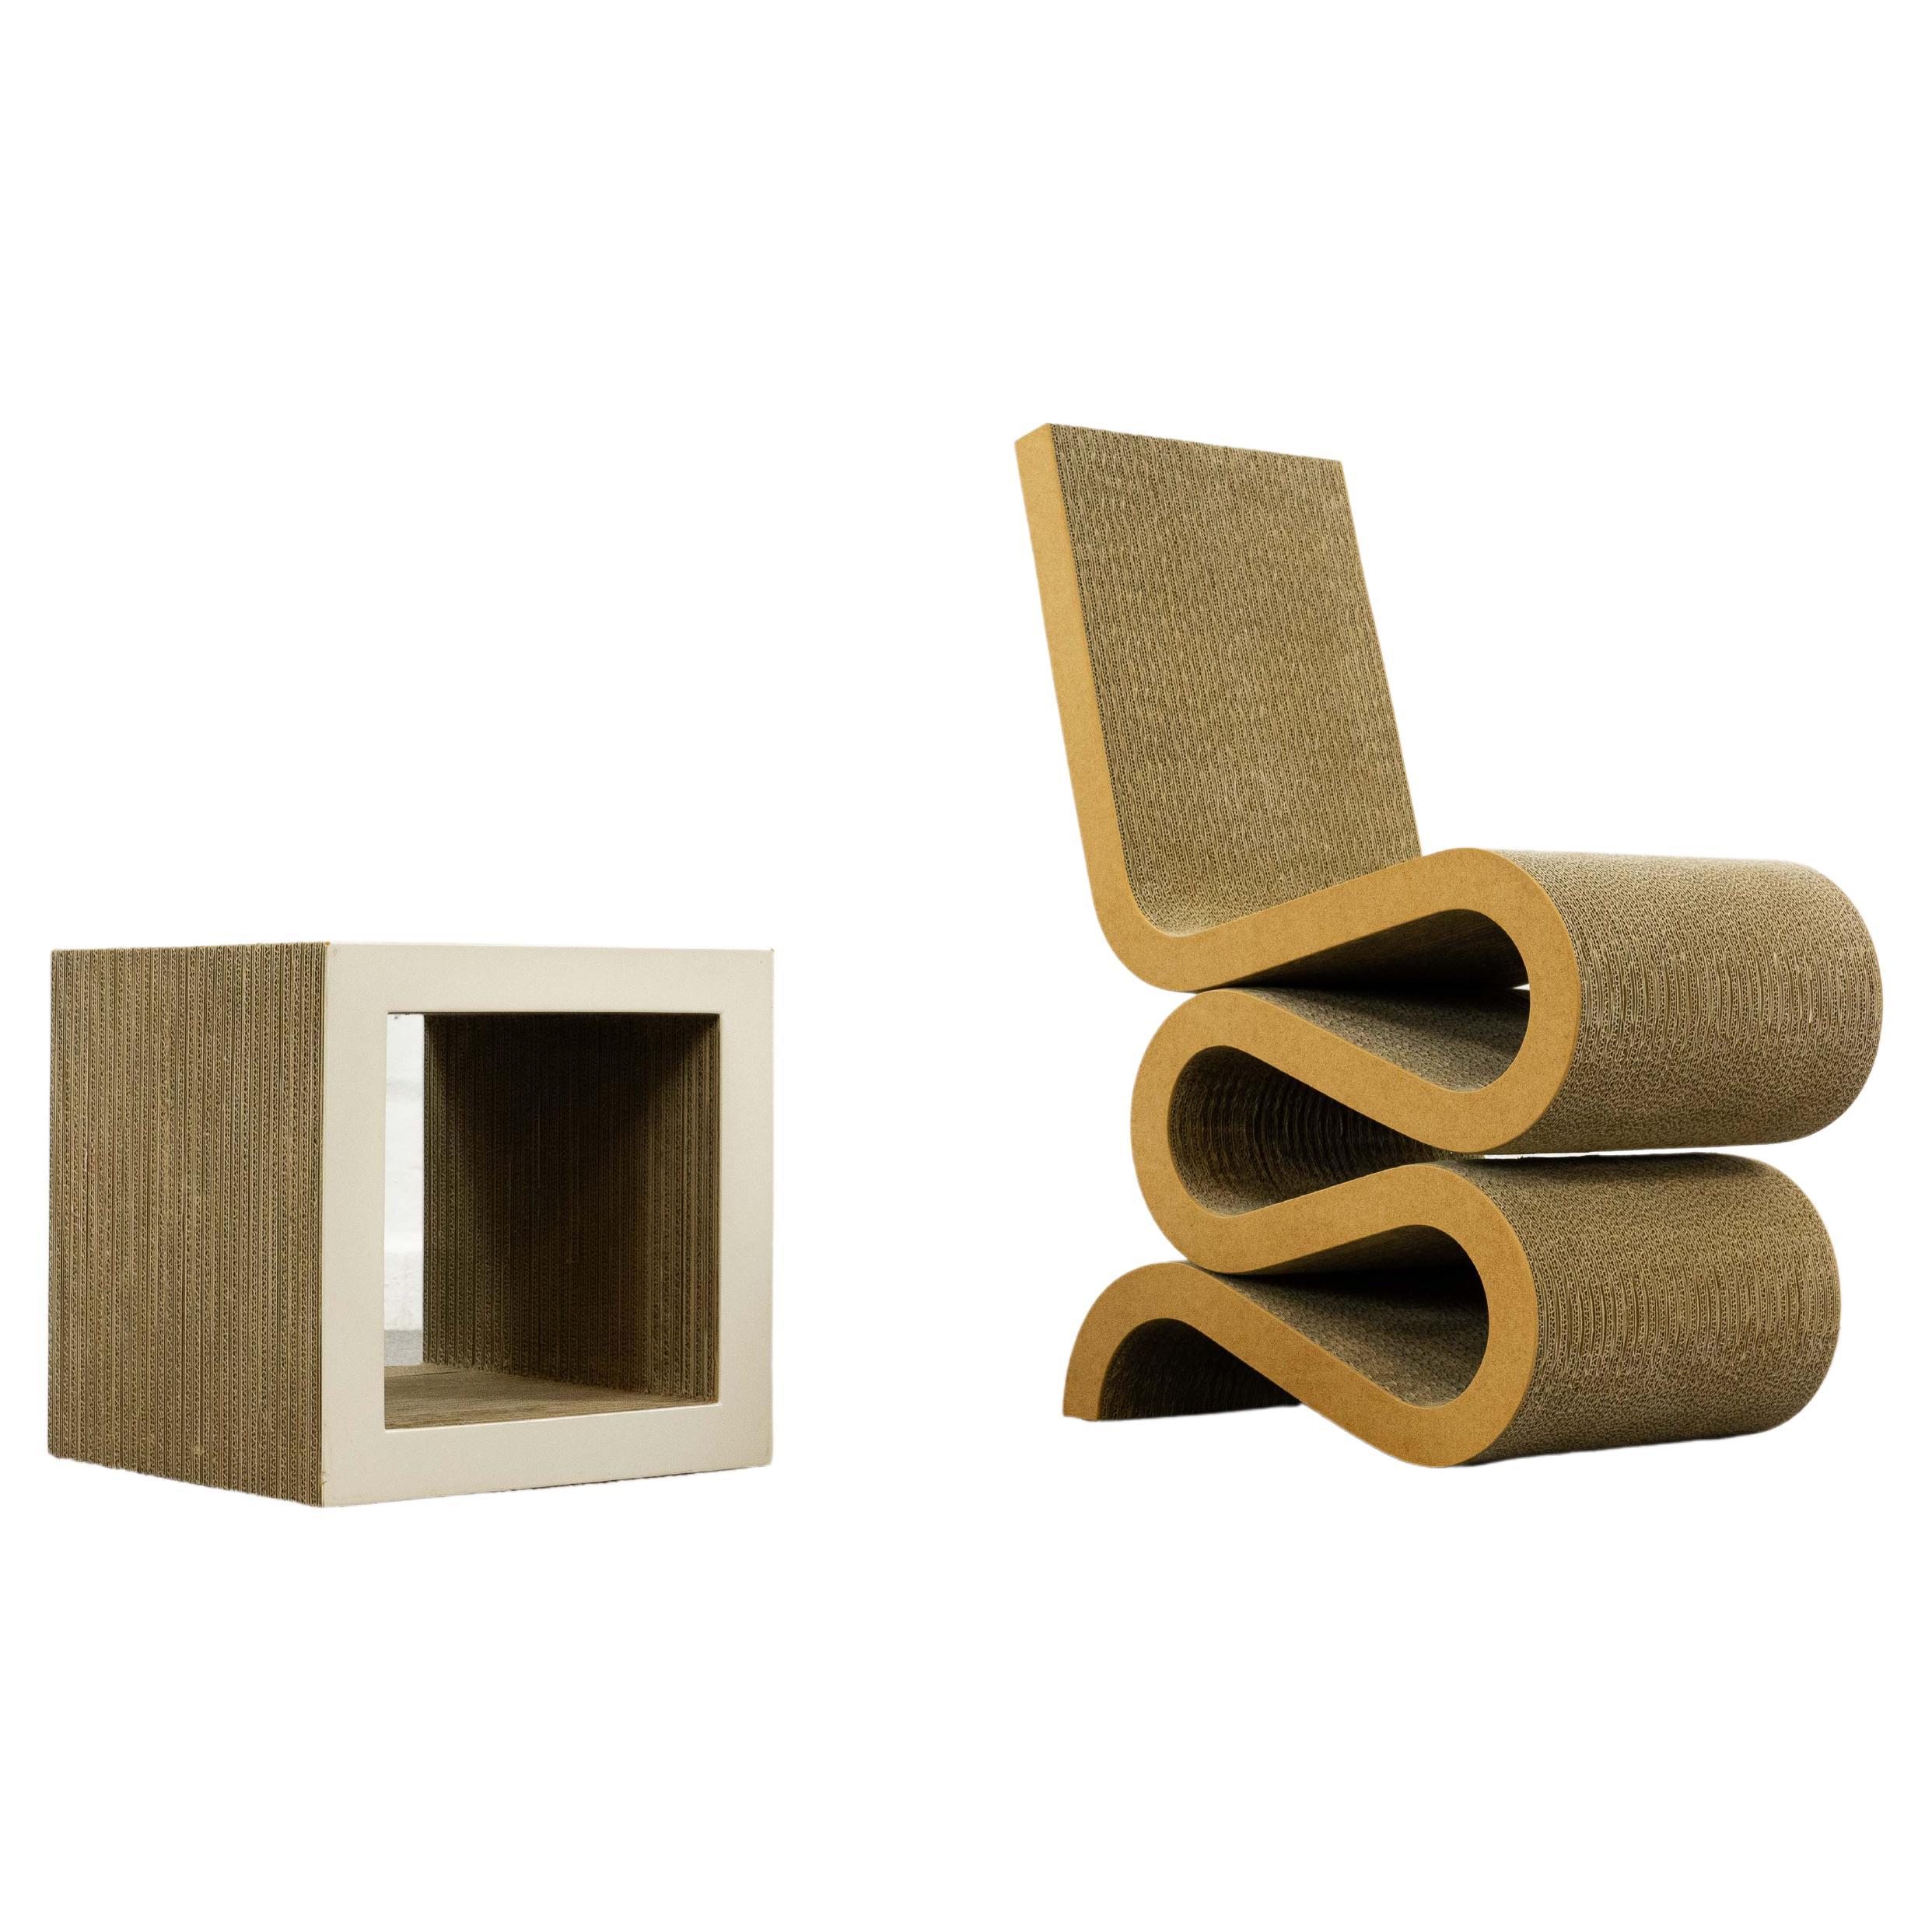 Wiggle Chair and Coffee Table by Frank O. Gehry for Vitra from Easy Edges Series